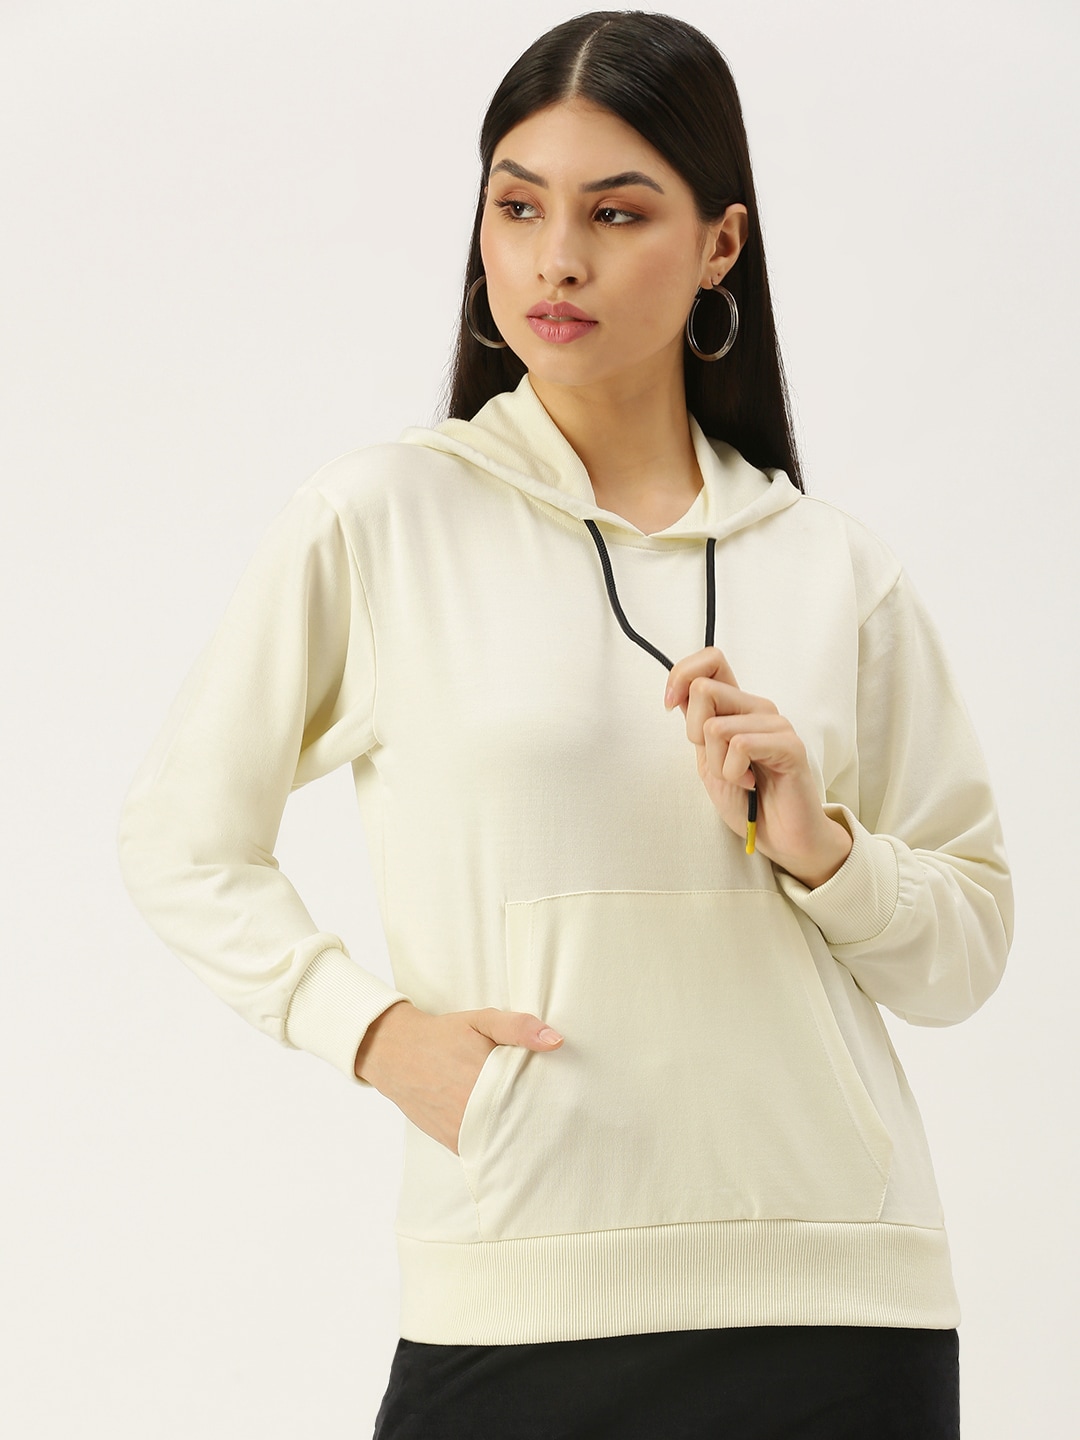 FOREVER 21 Women Off White Hooded Sweatshirt Price in India